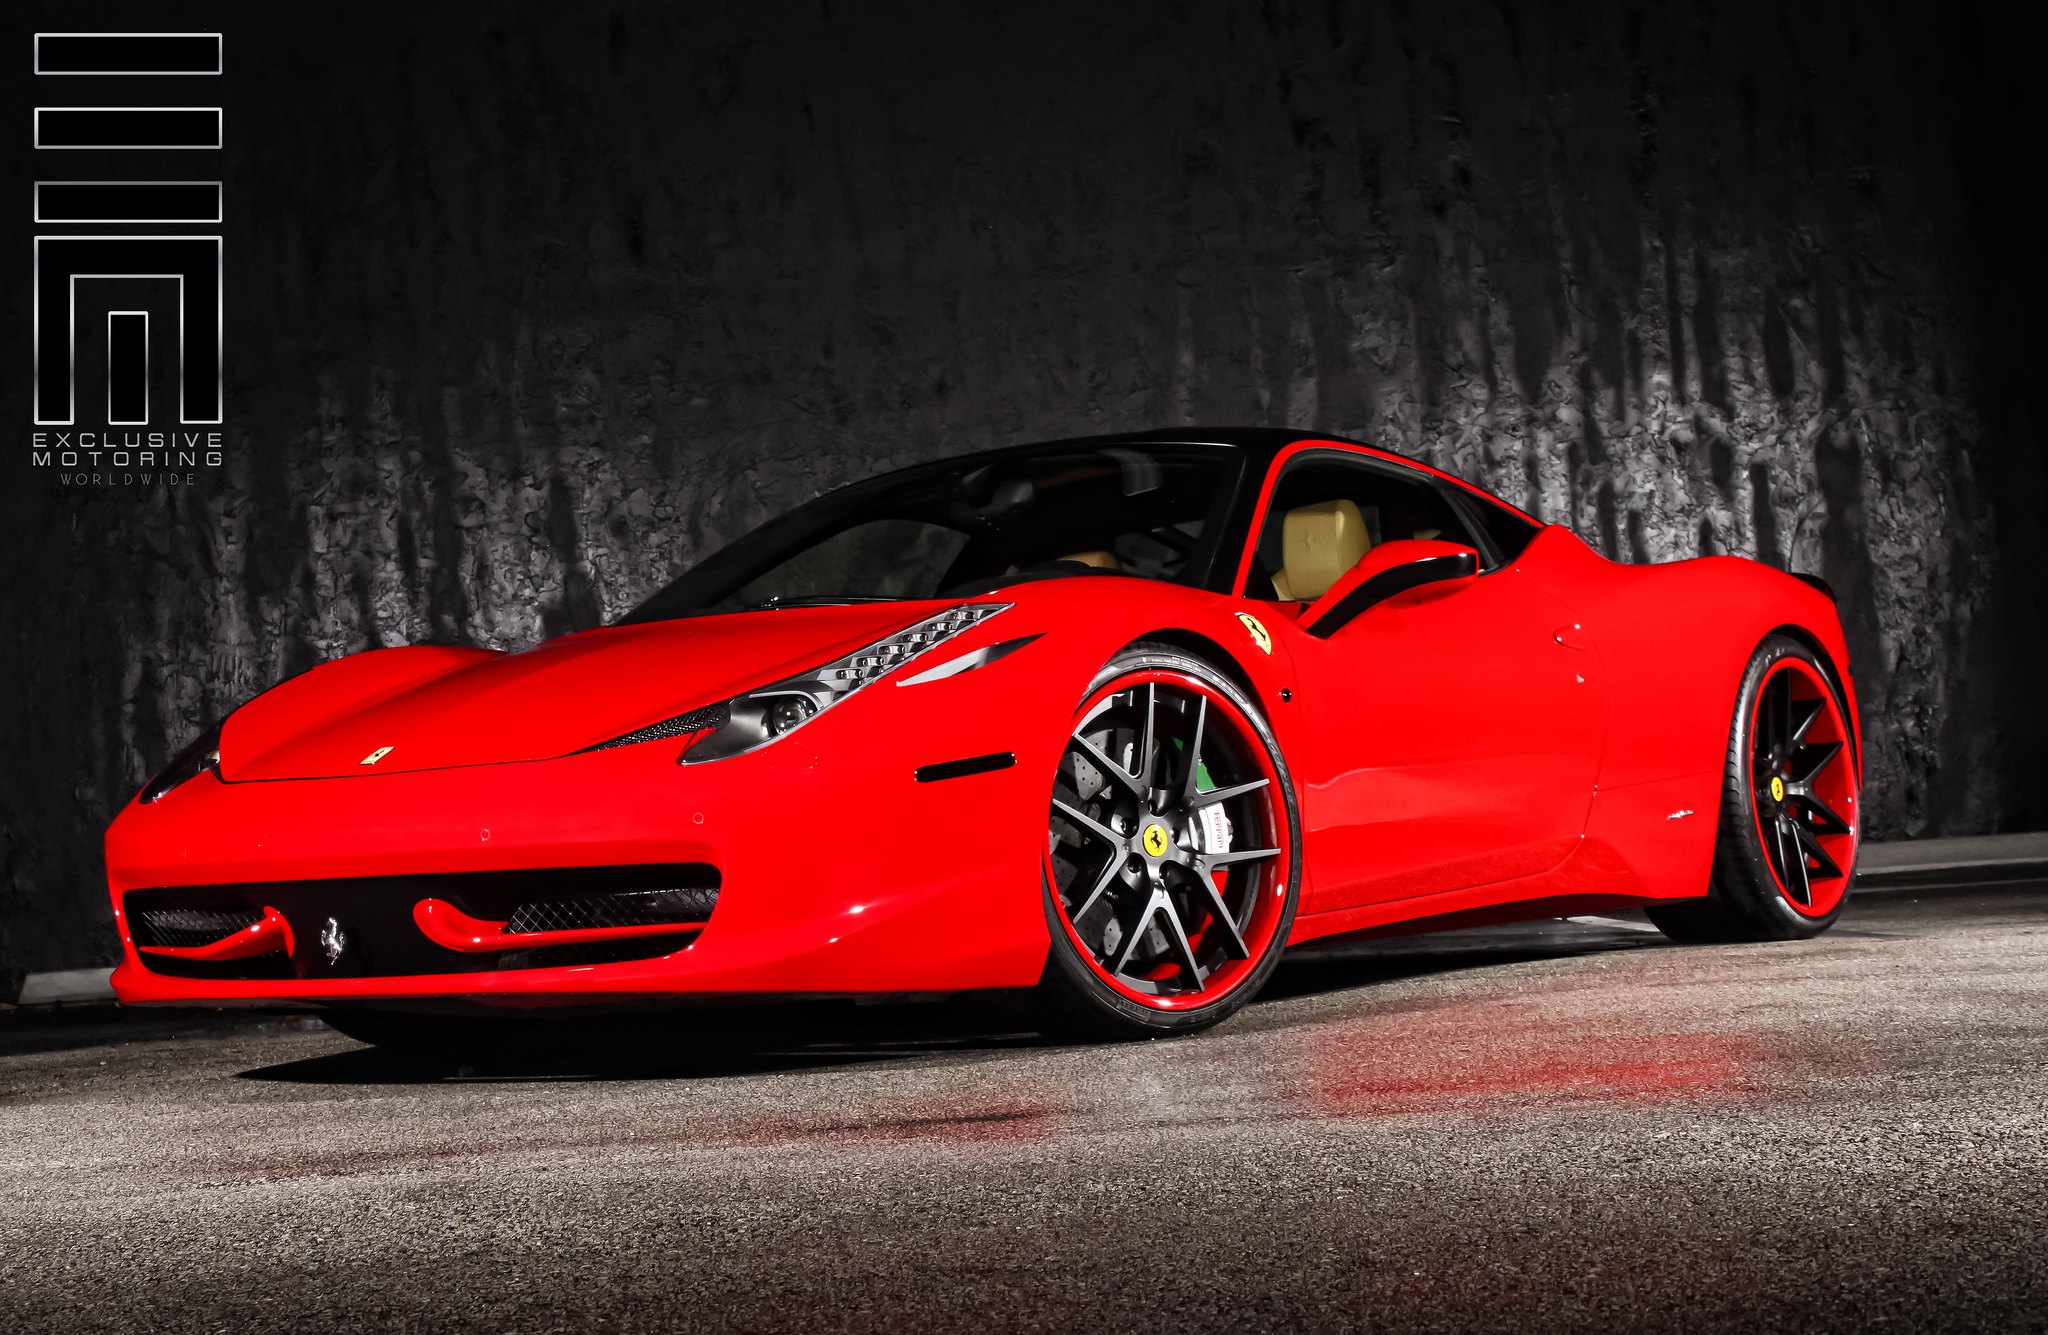 Ferrari 458 on Black Rims With Red Lips - Photo by Exclusive Motoring